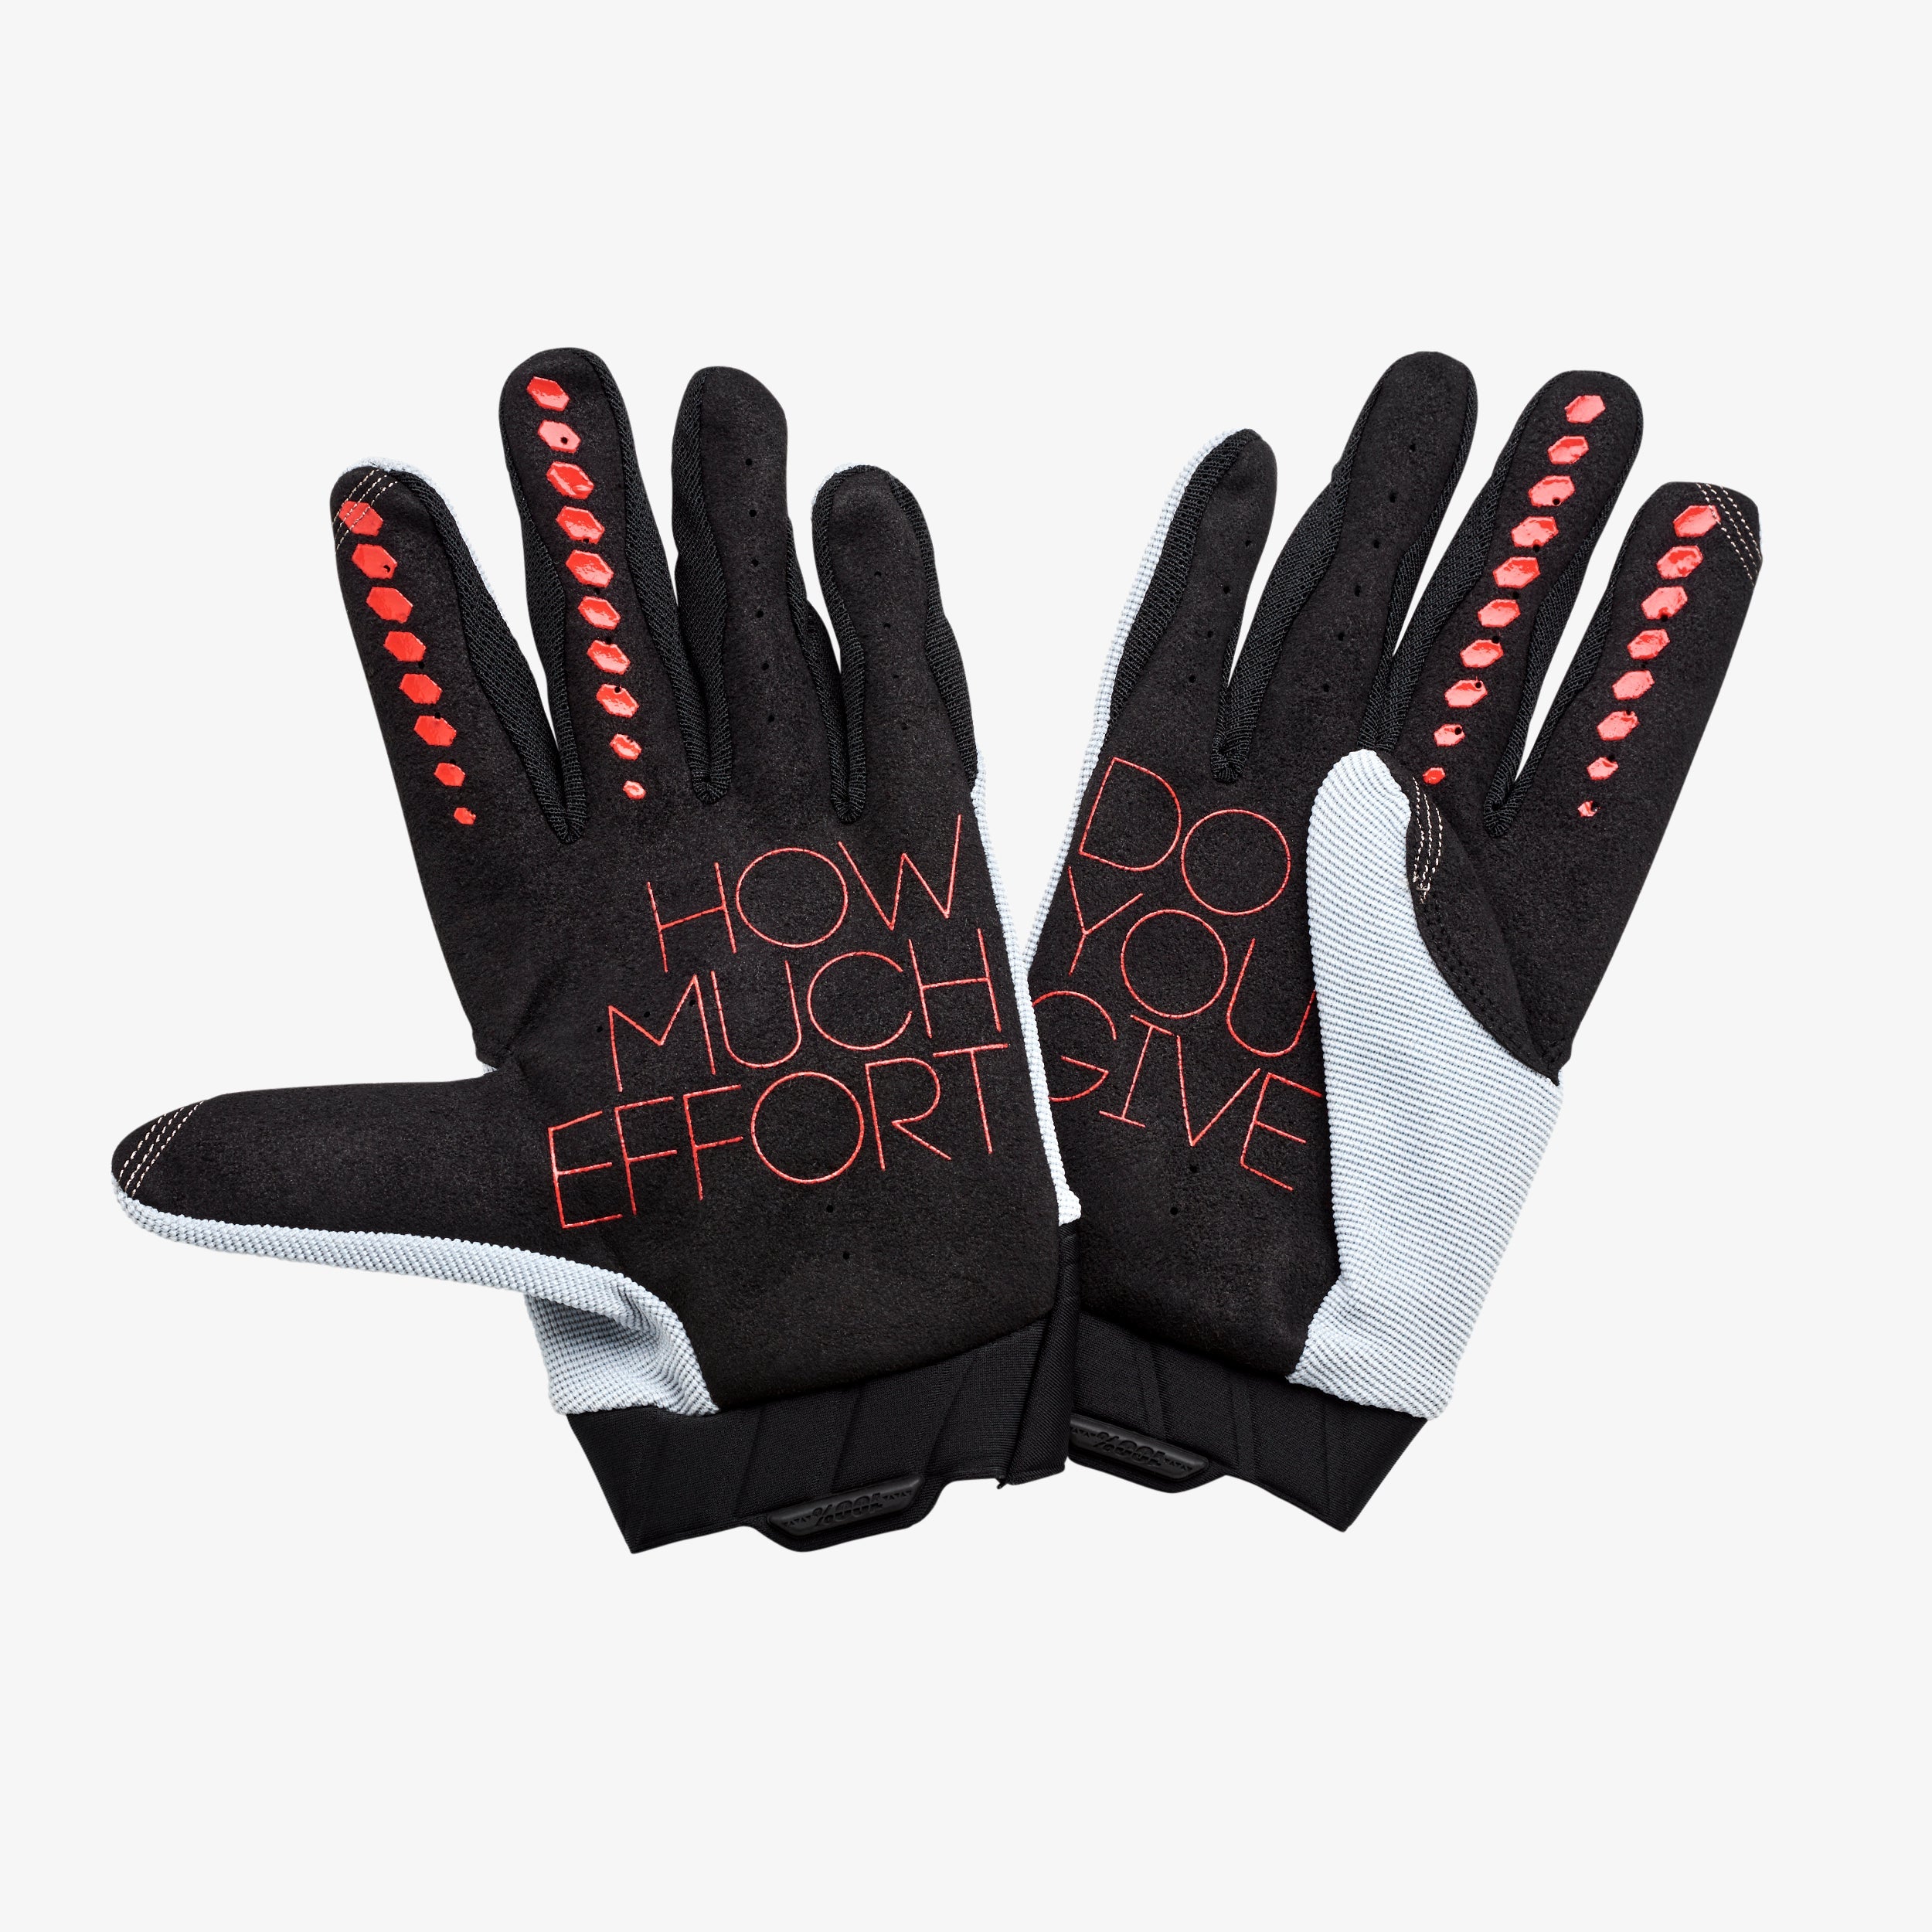 GEOMATIC Gloves Grey/Racer Red MTB - Secondary